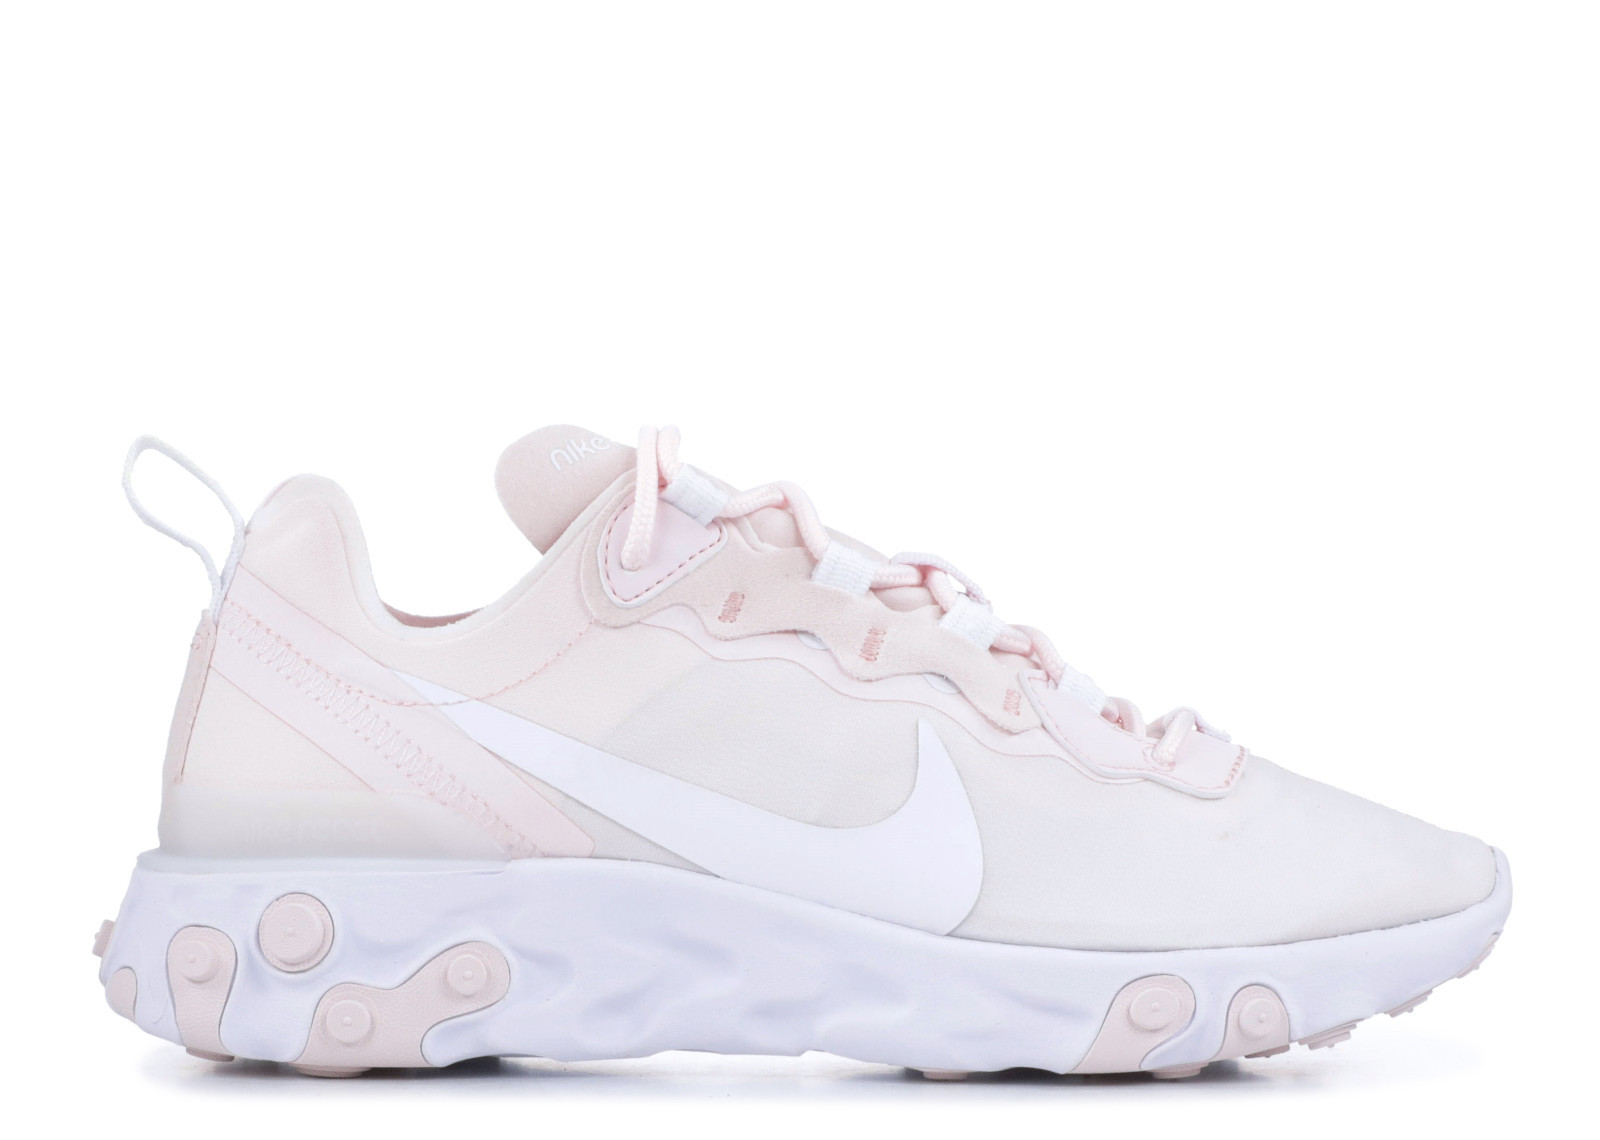 ELEMENT REACT 55 W "PALE PINK" image 1